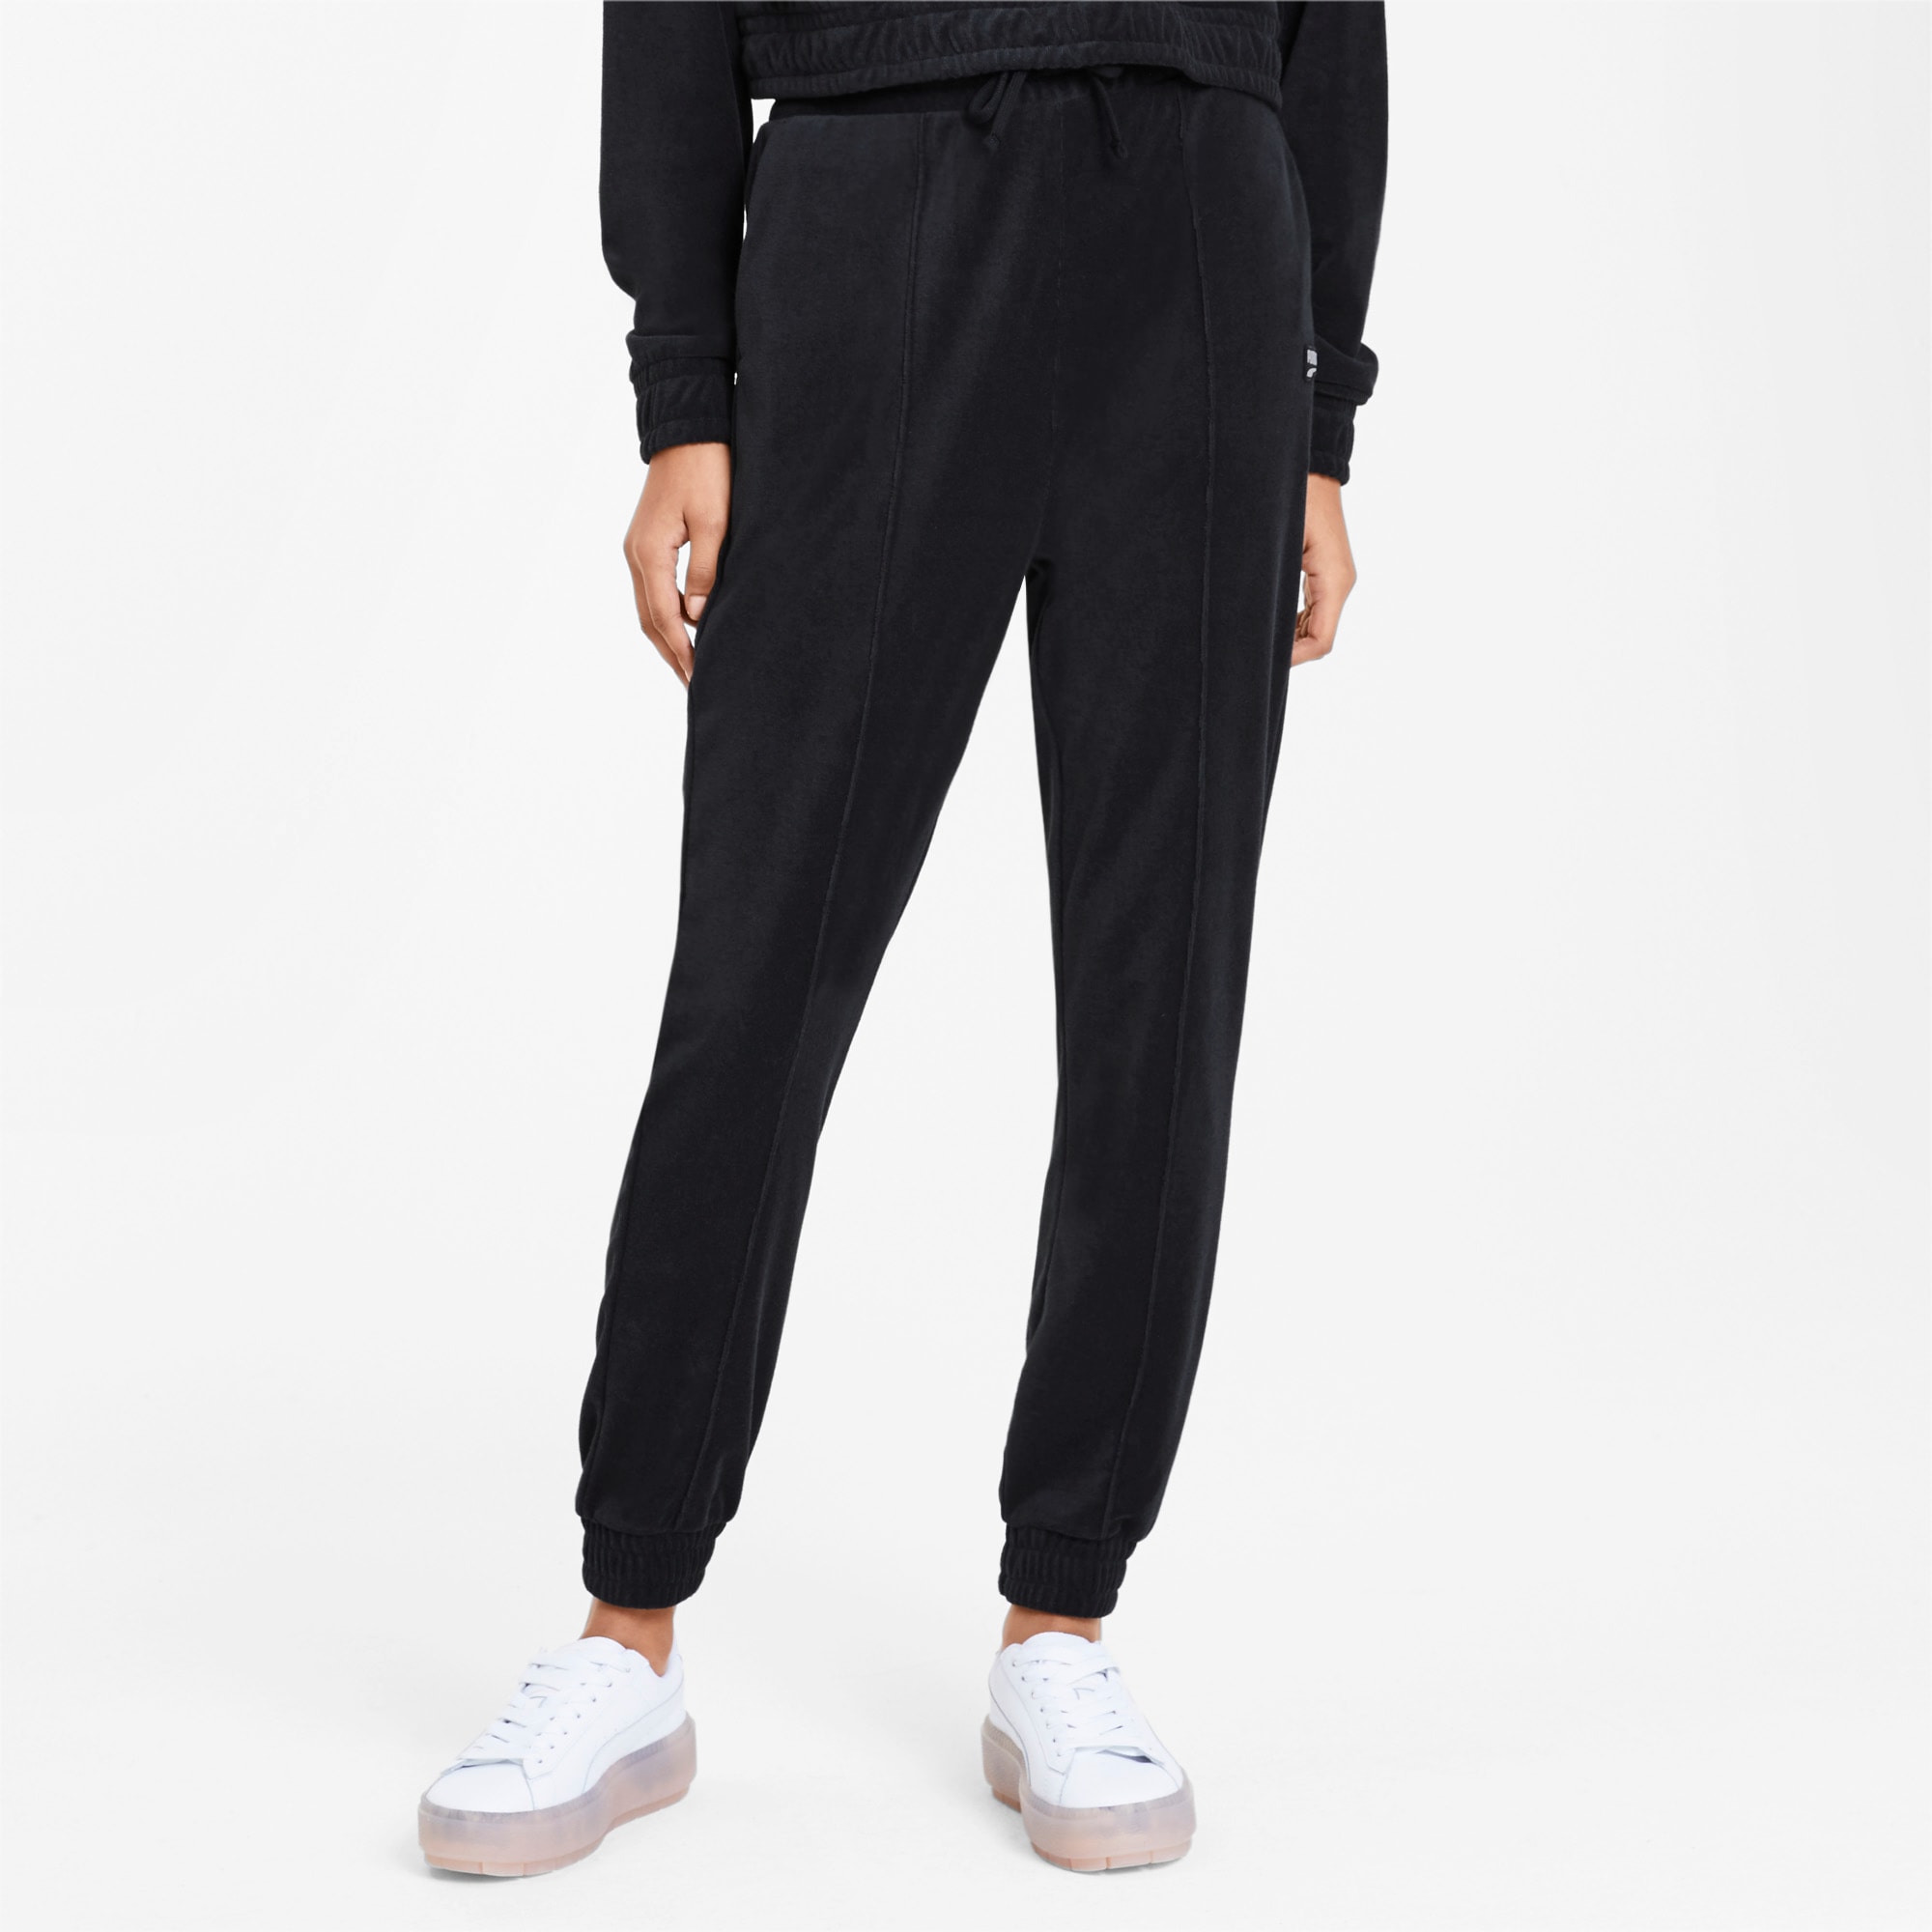 Downtown Tapered Women's Sweatpants 